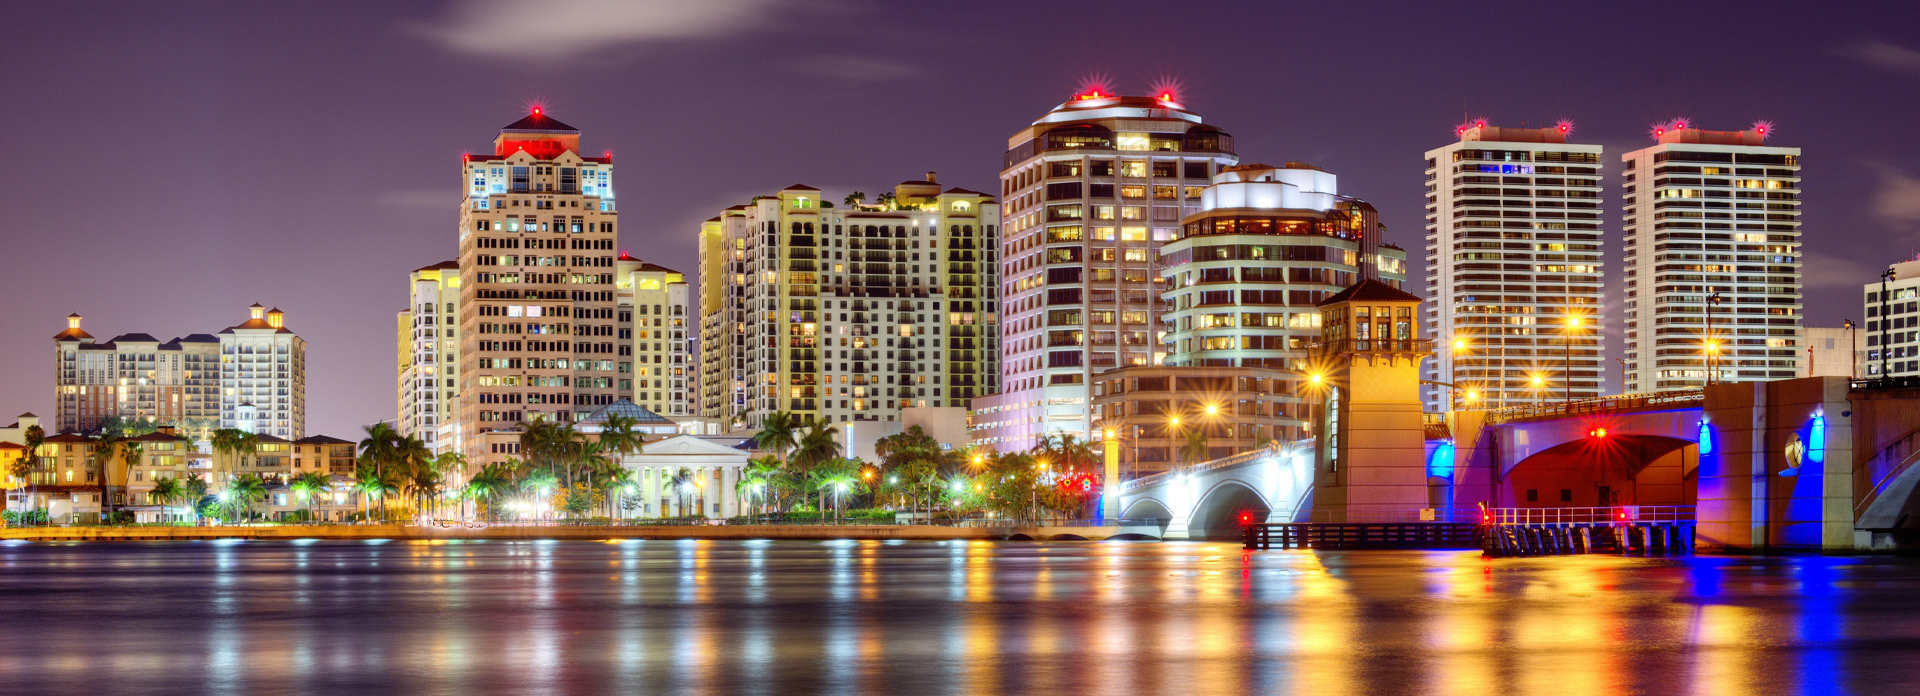 west palm beach properties for sale